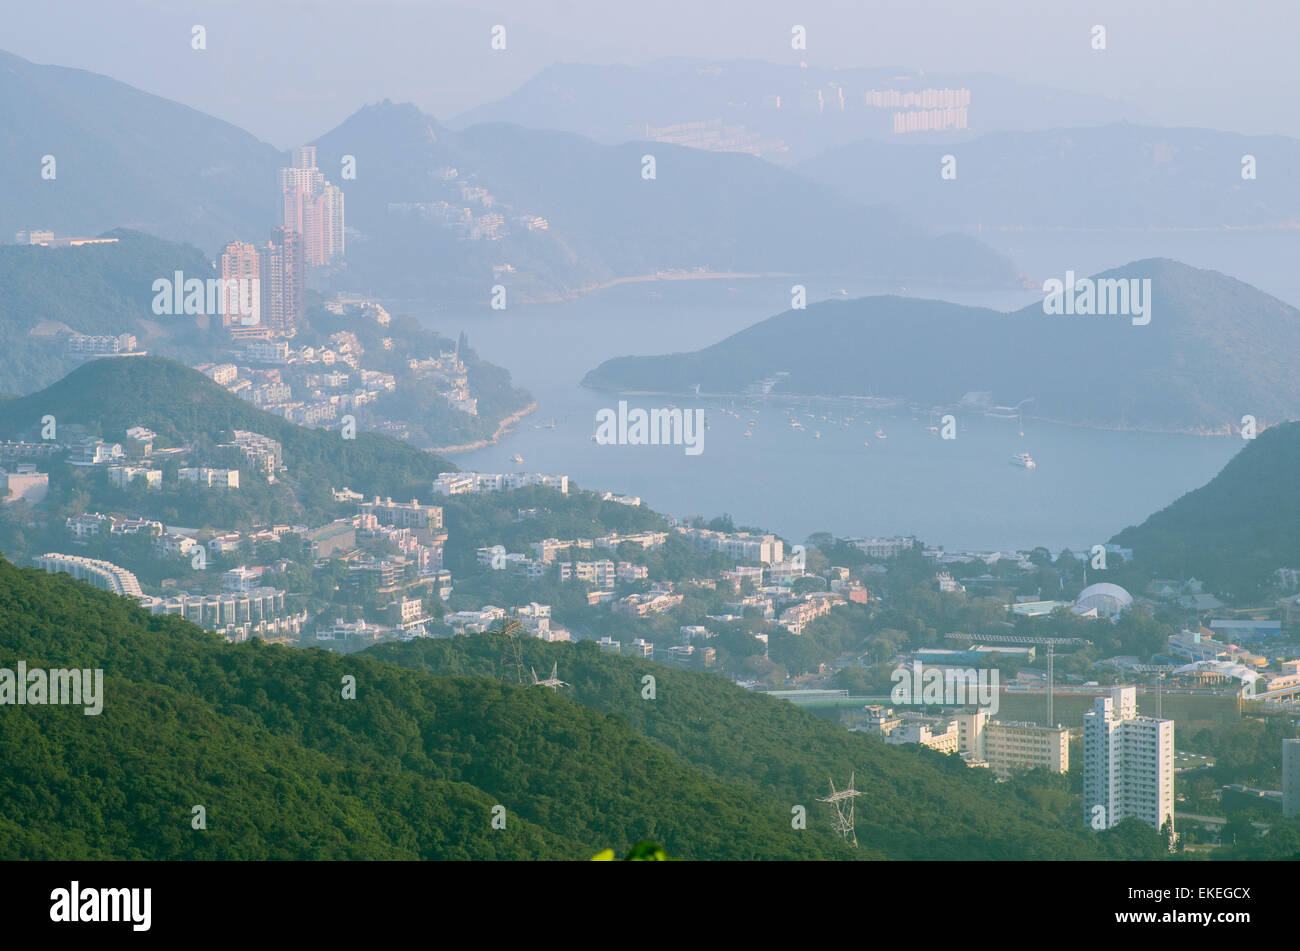 View from the peak of Hong Kong, a modern city. Stock Photo